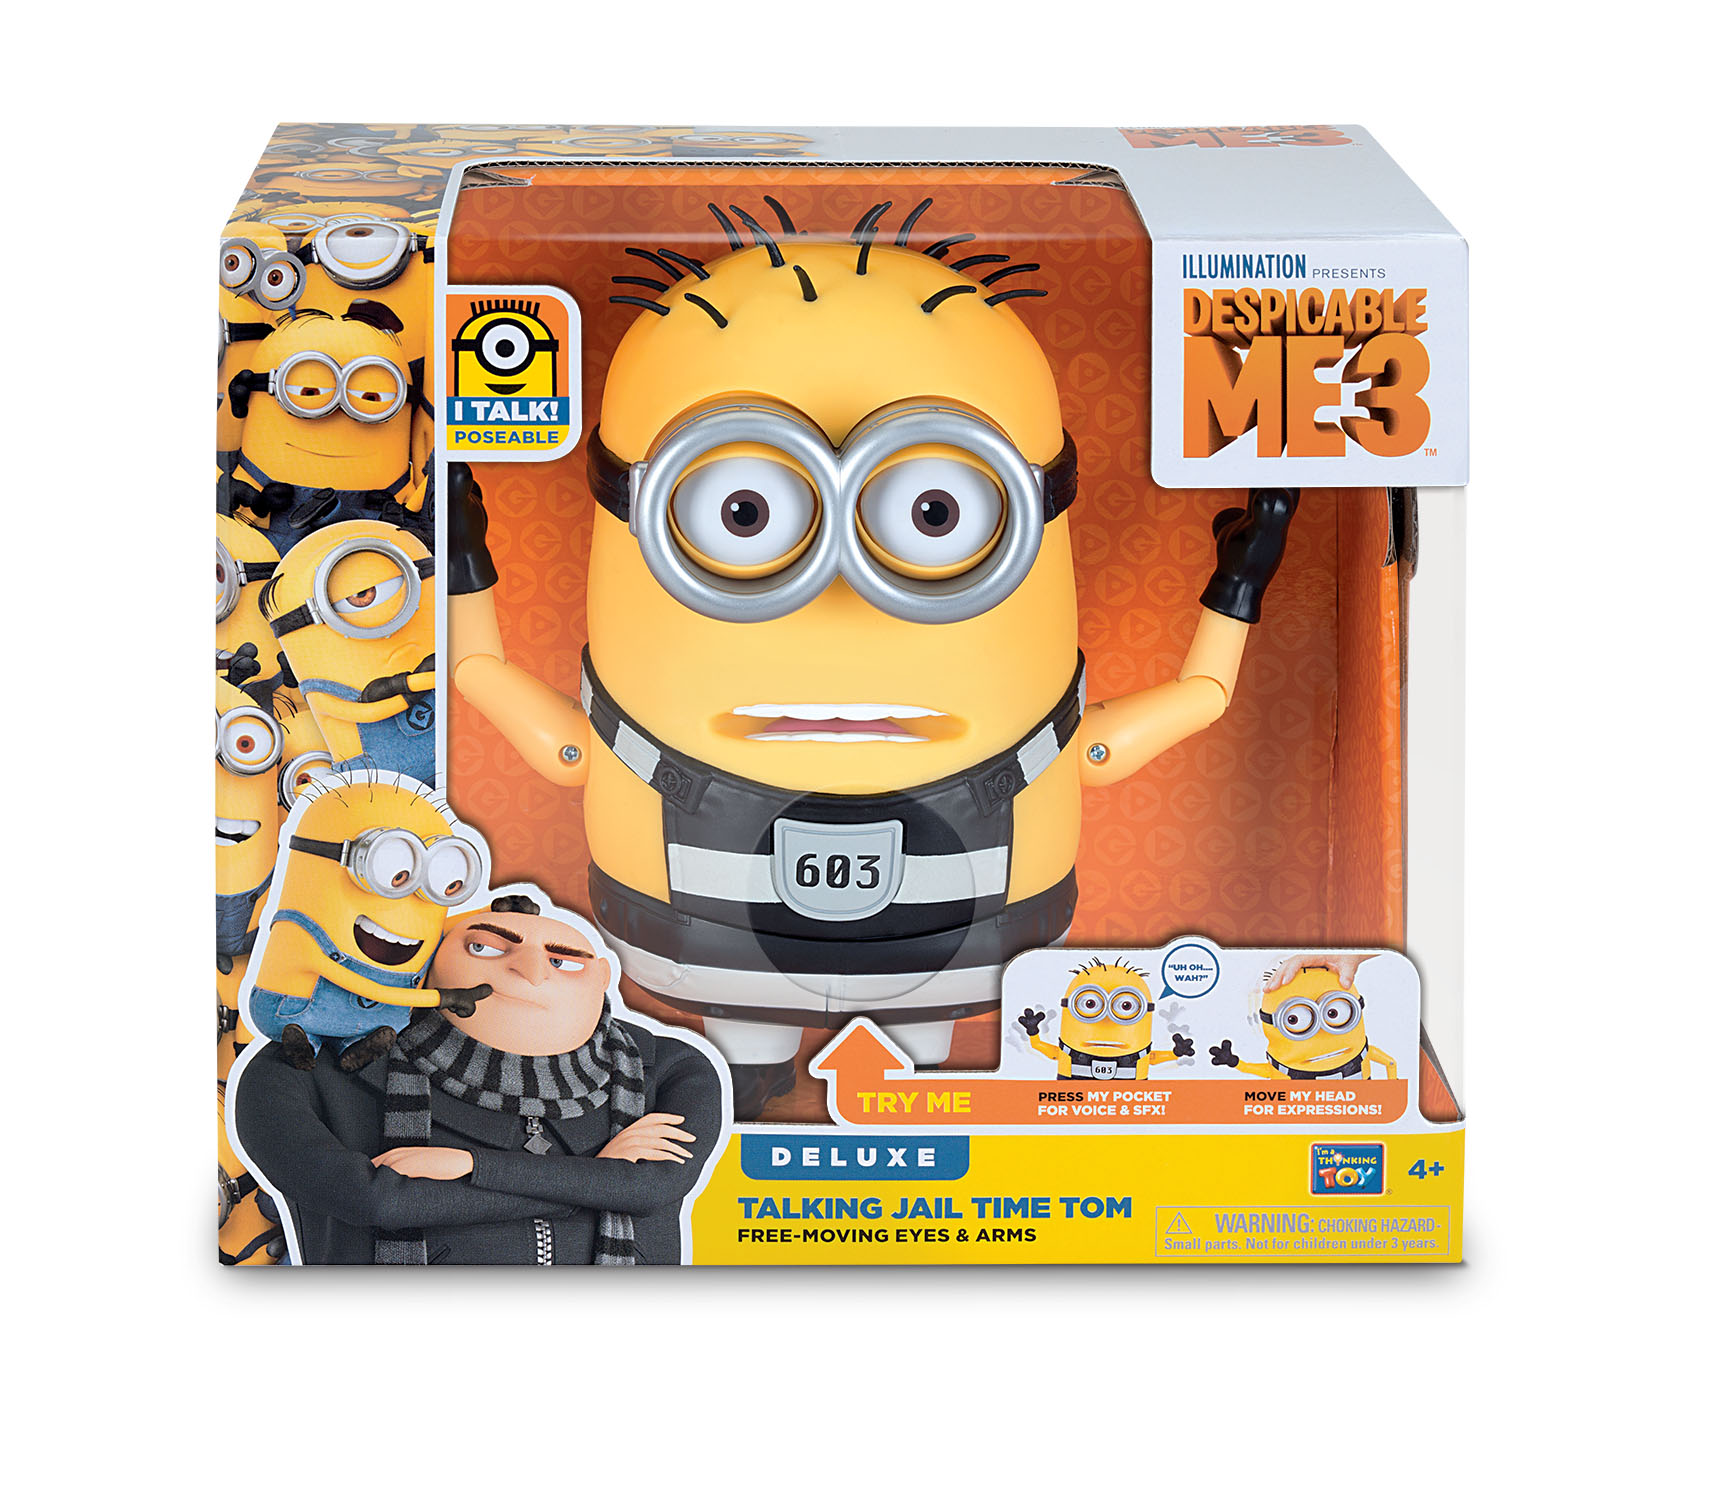 Despicable Me 3 Talking Action Figure Jail Time Tom - image 2 of 2